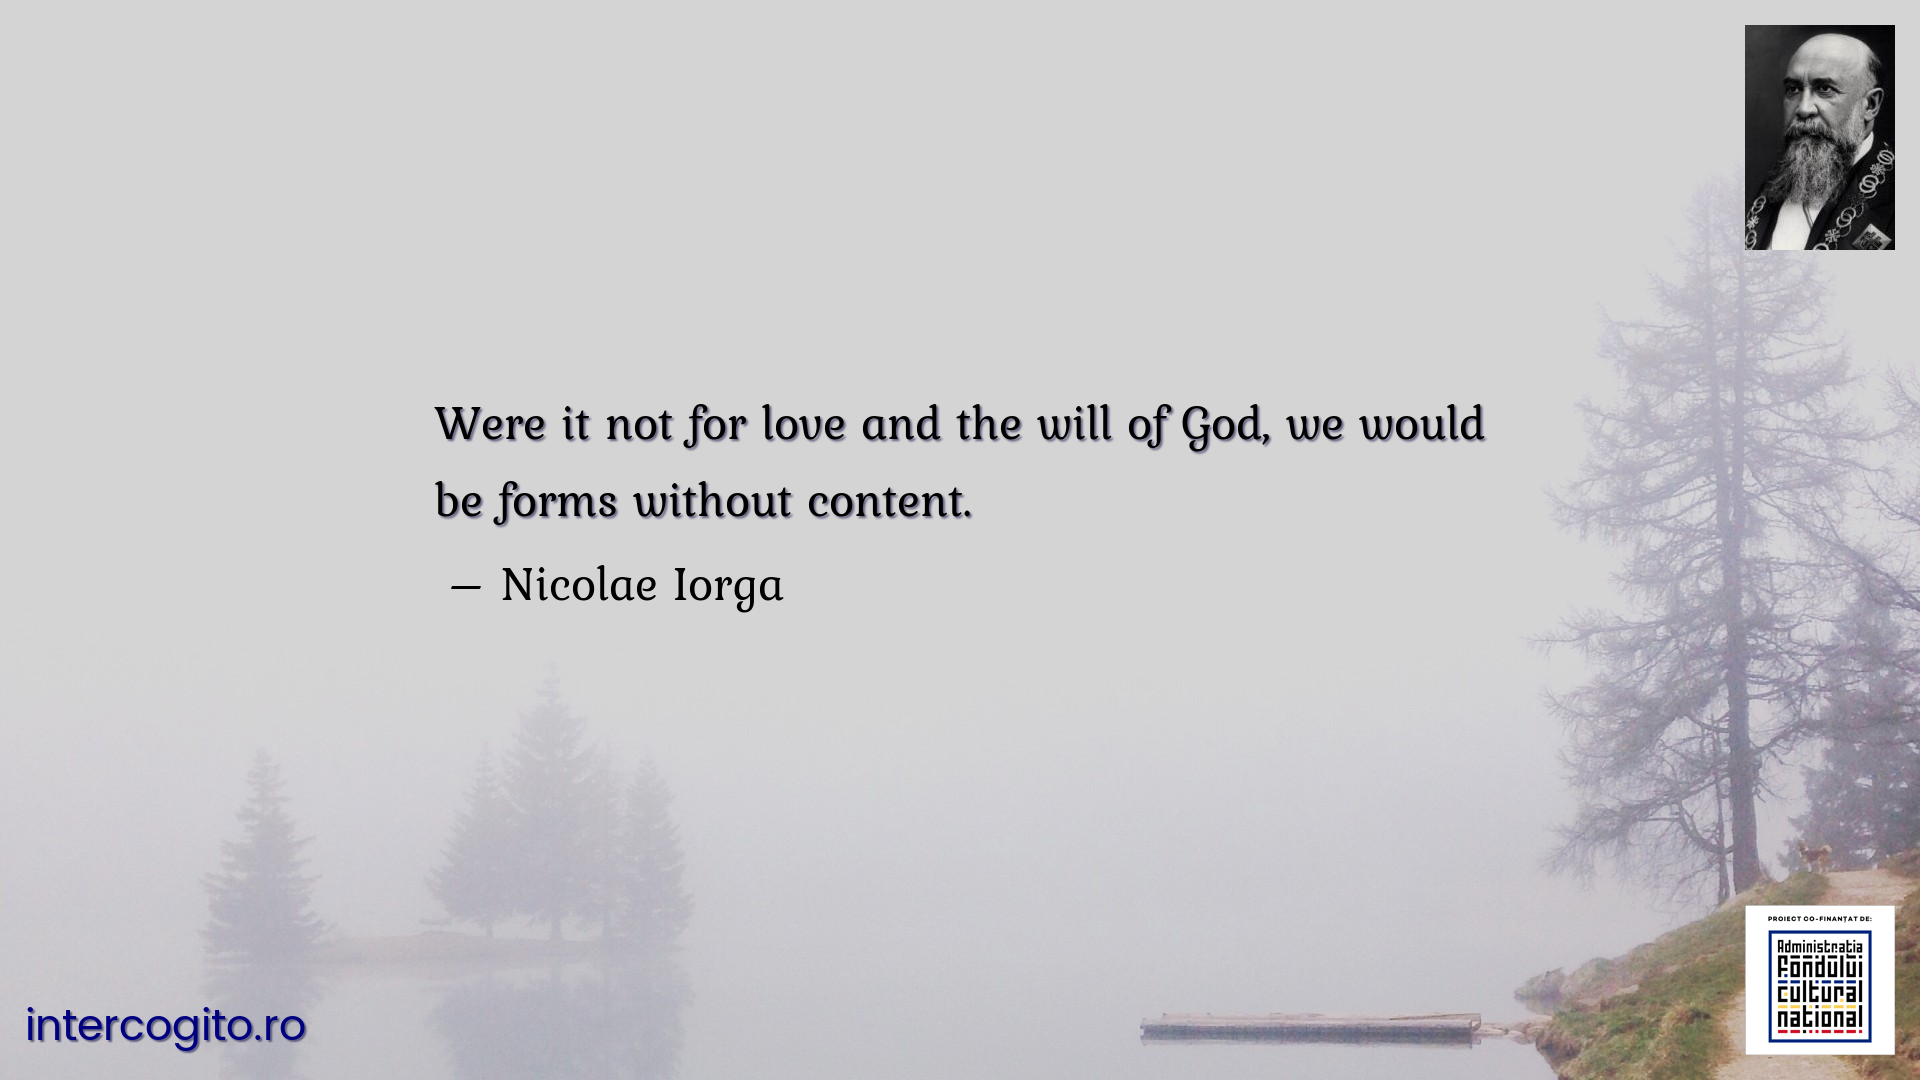 Were it not for love and the will of God, we would be forms without content.